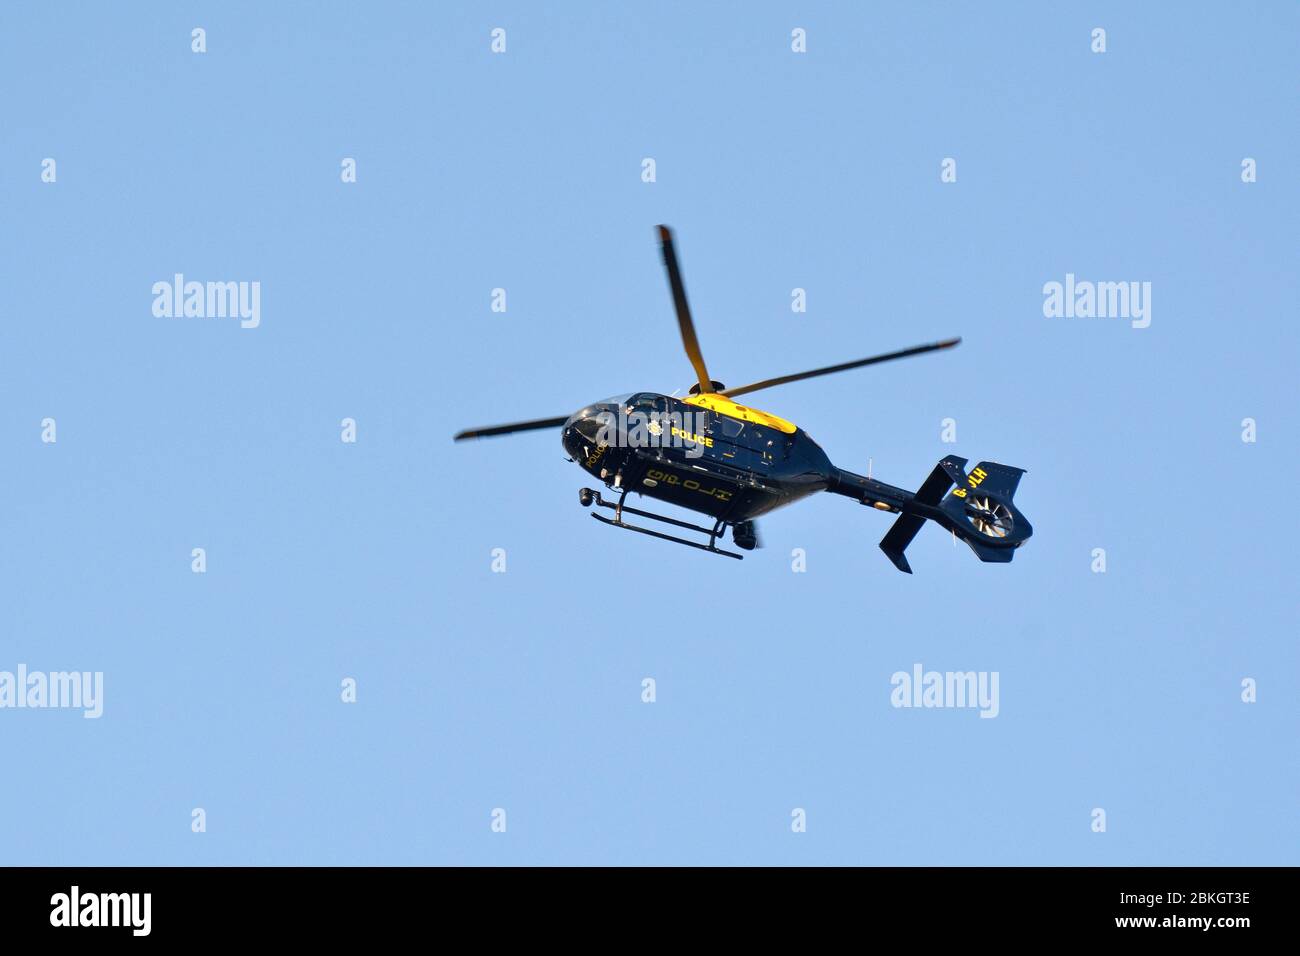 A National Police Air Service helicopter hovering above against a clear blue sky Stock Photo